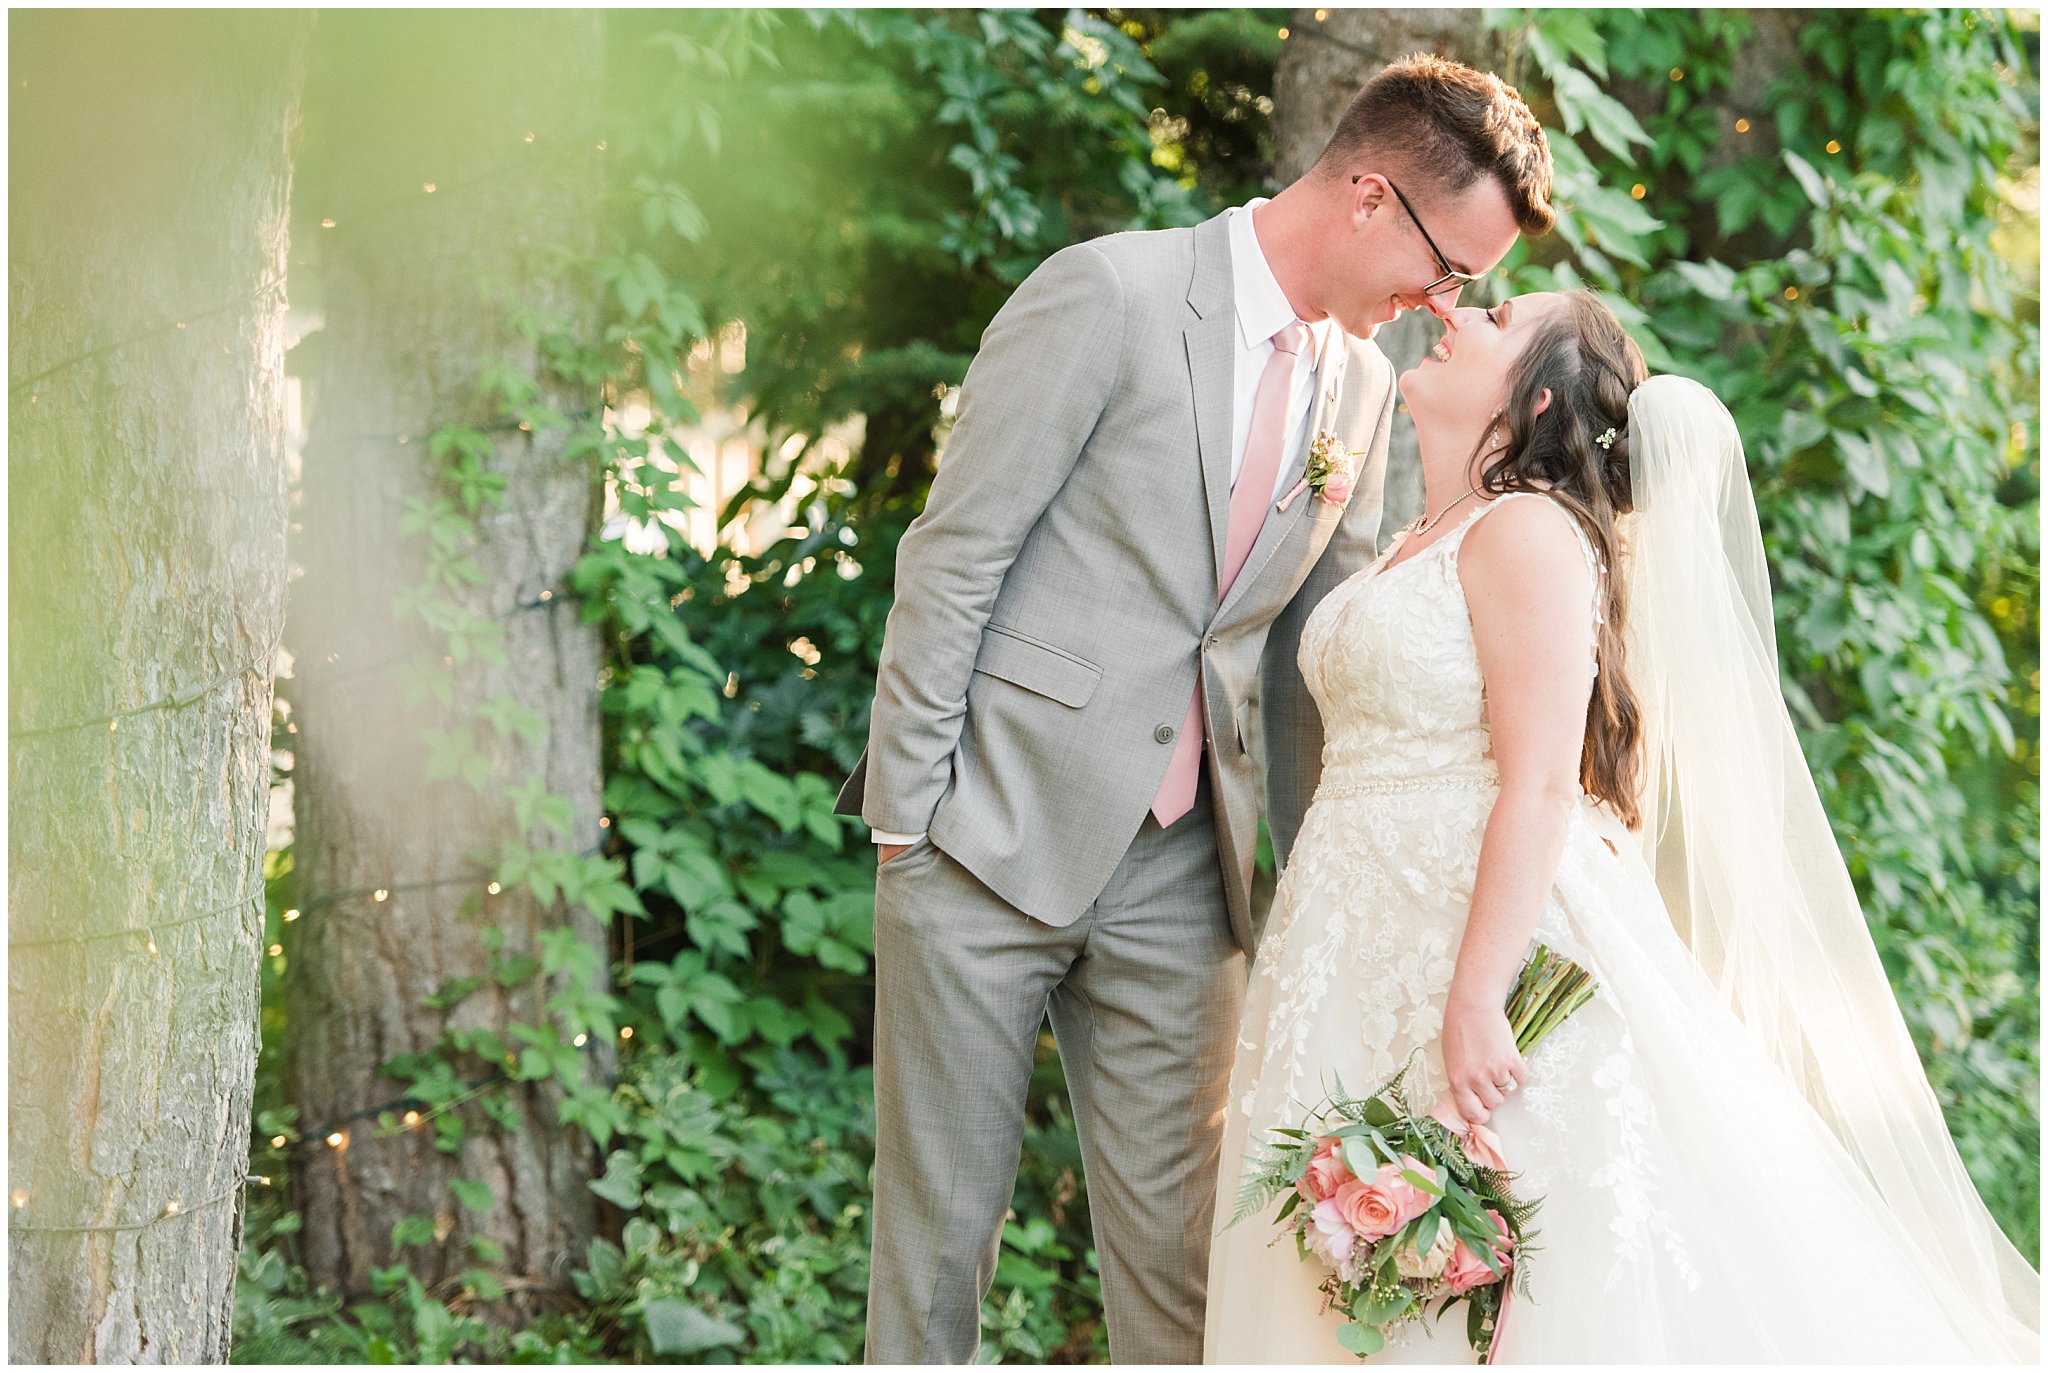 Bride and groom portraits in vines and lodge pole pines | Oak Hills Utah Dusty Rose and Gray Summer Wedding | Jessie and Dallin Photography